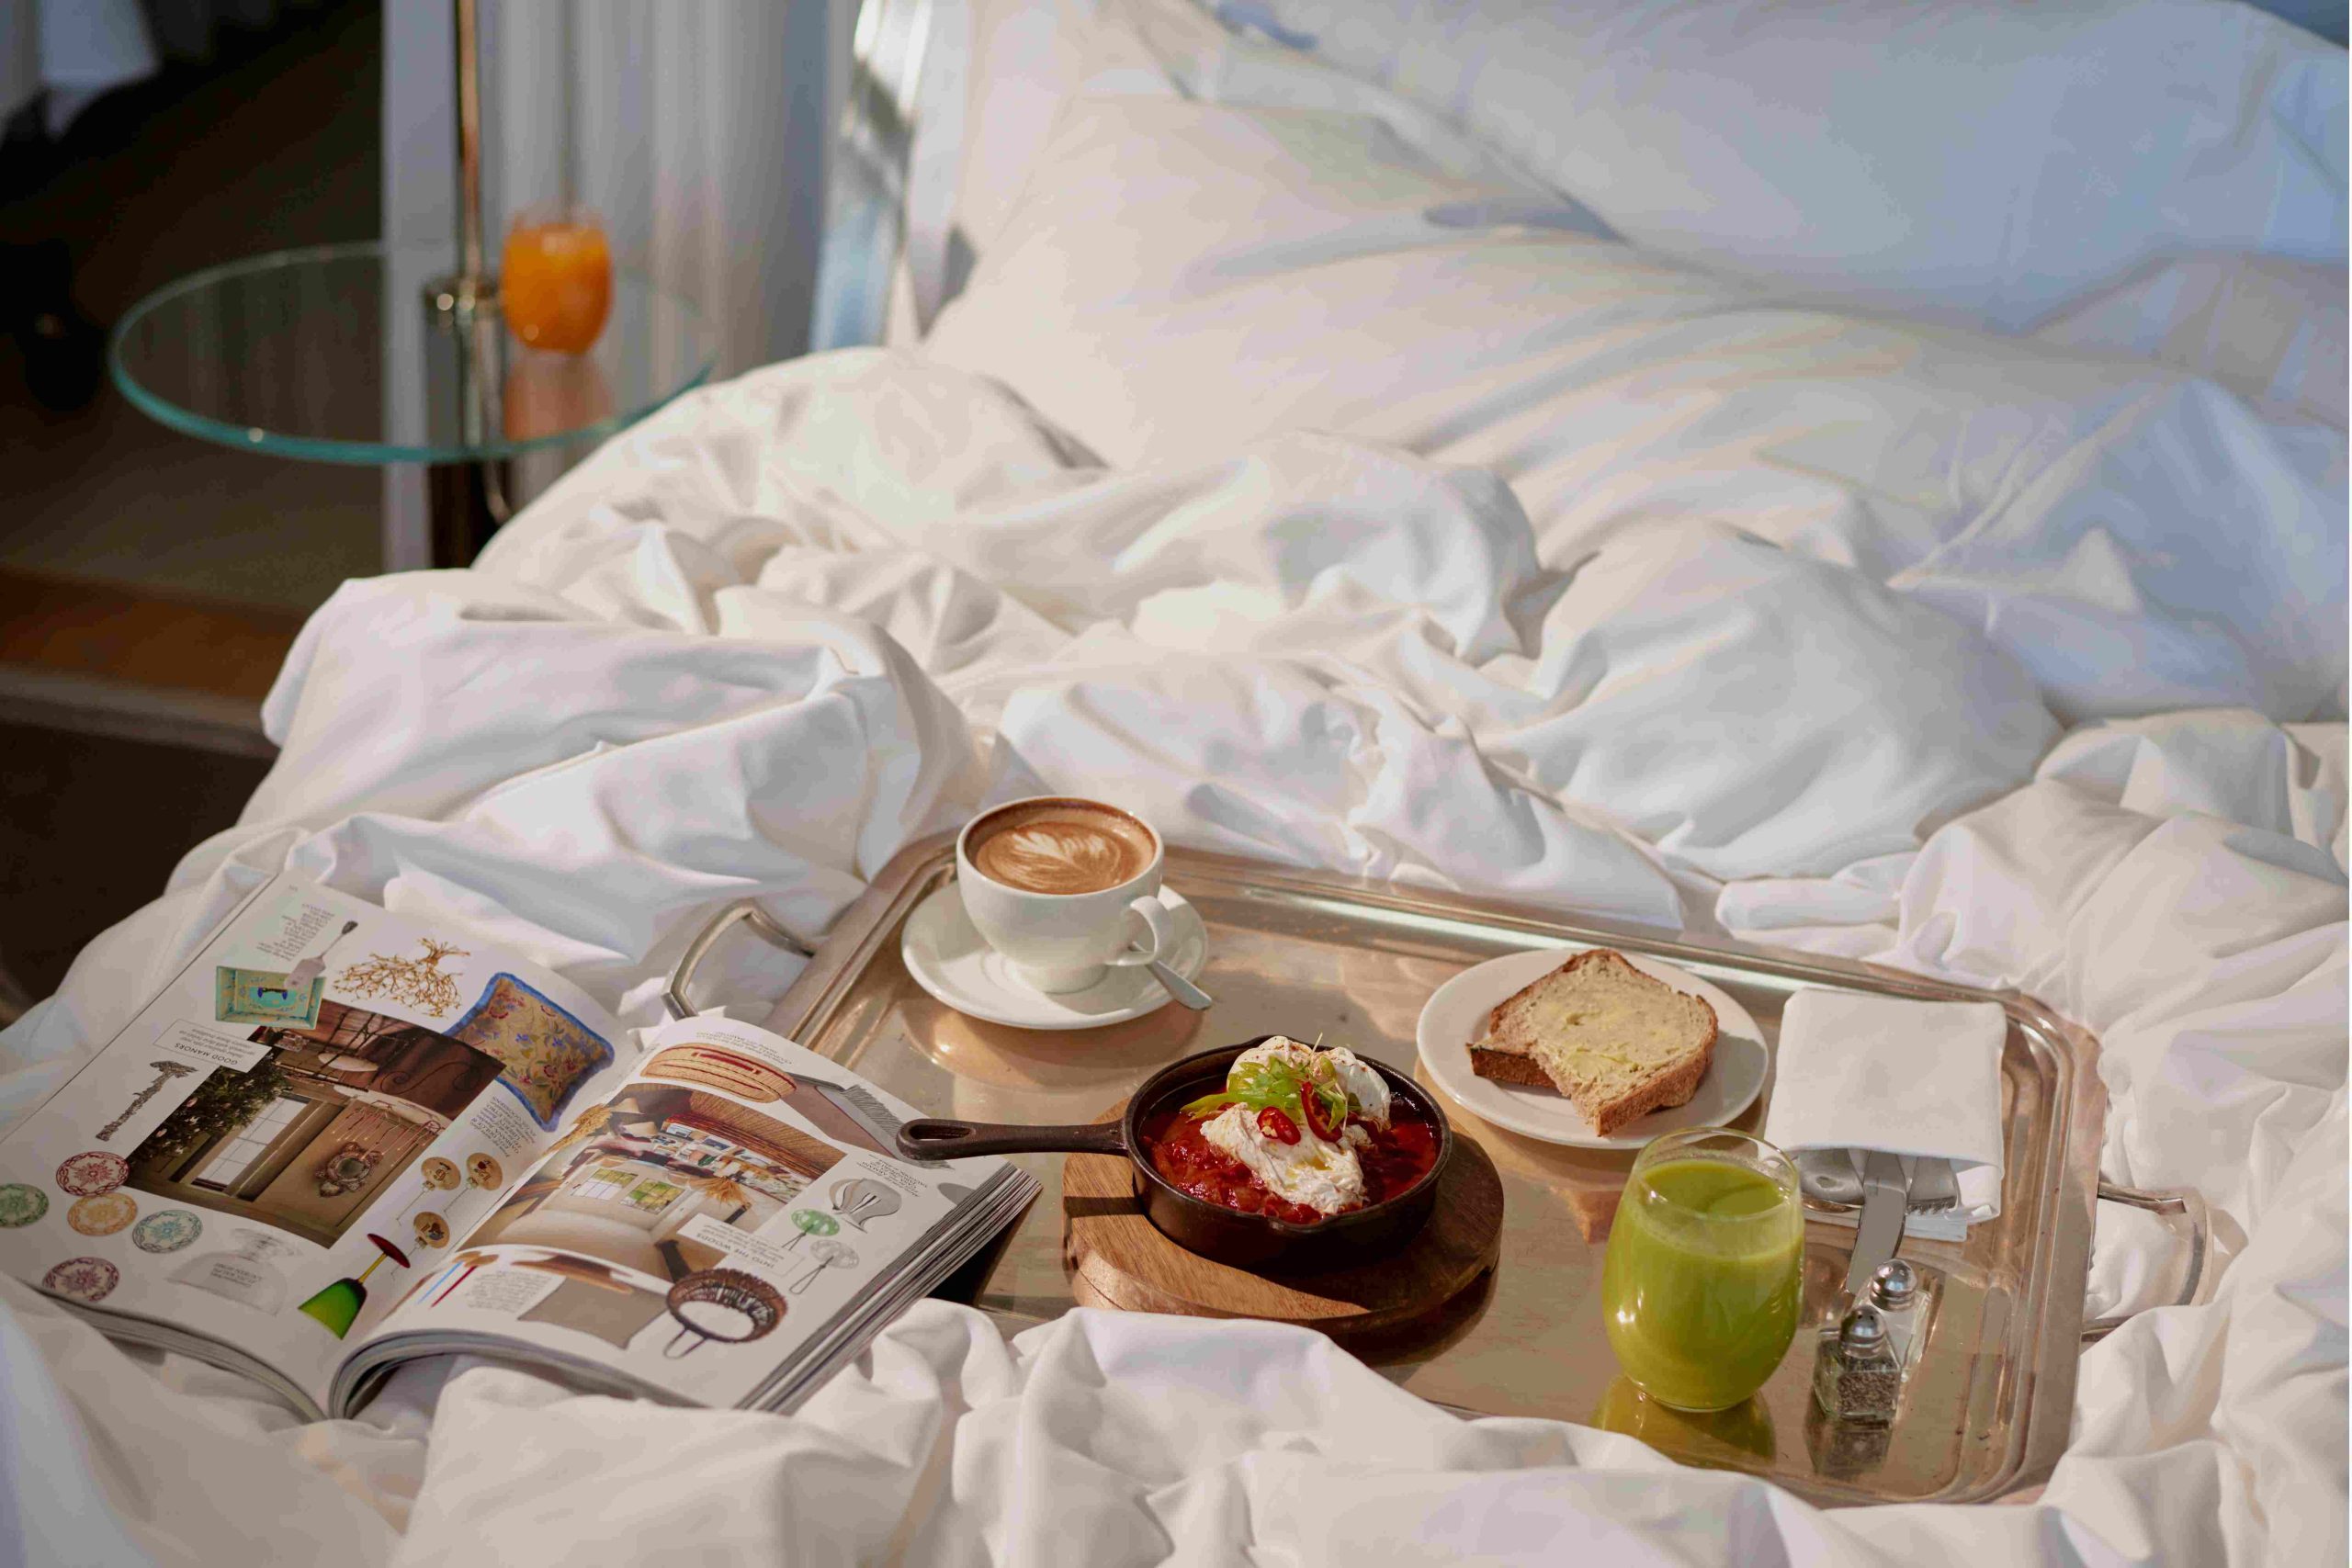 Coffee, toast, eggs, green juice on a tray with a magazine open on a white bed